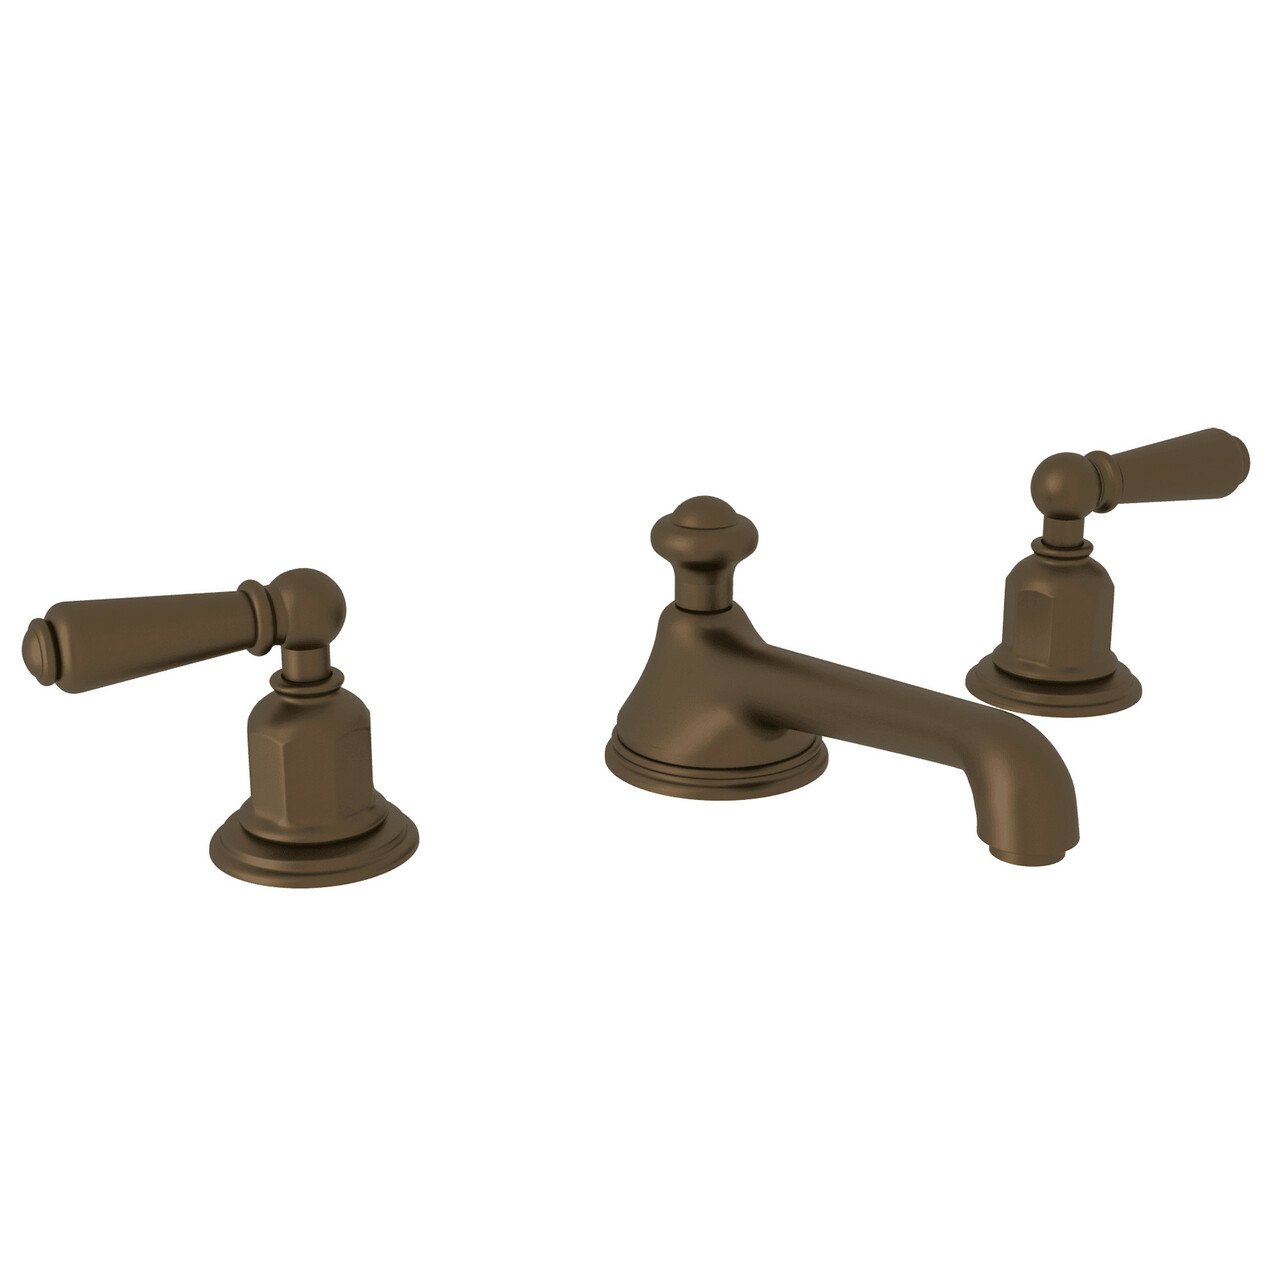 Perrin & Rowe Edwardian Low Level Spout Widespread Bathroom Faucet -  Unlacquered Brass with Metal Lever Handle